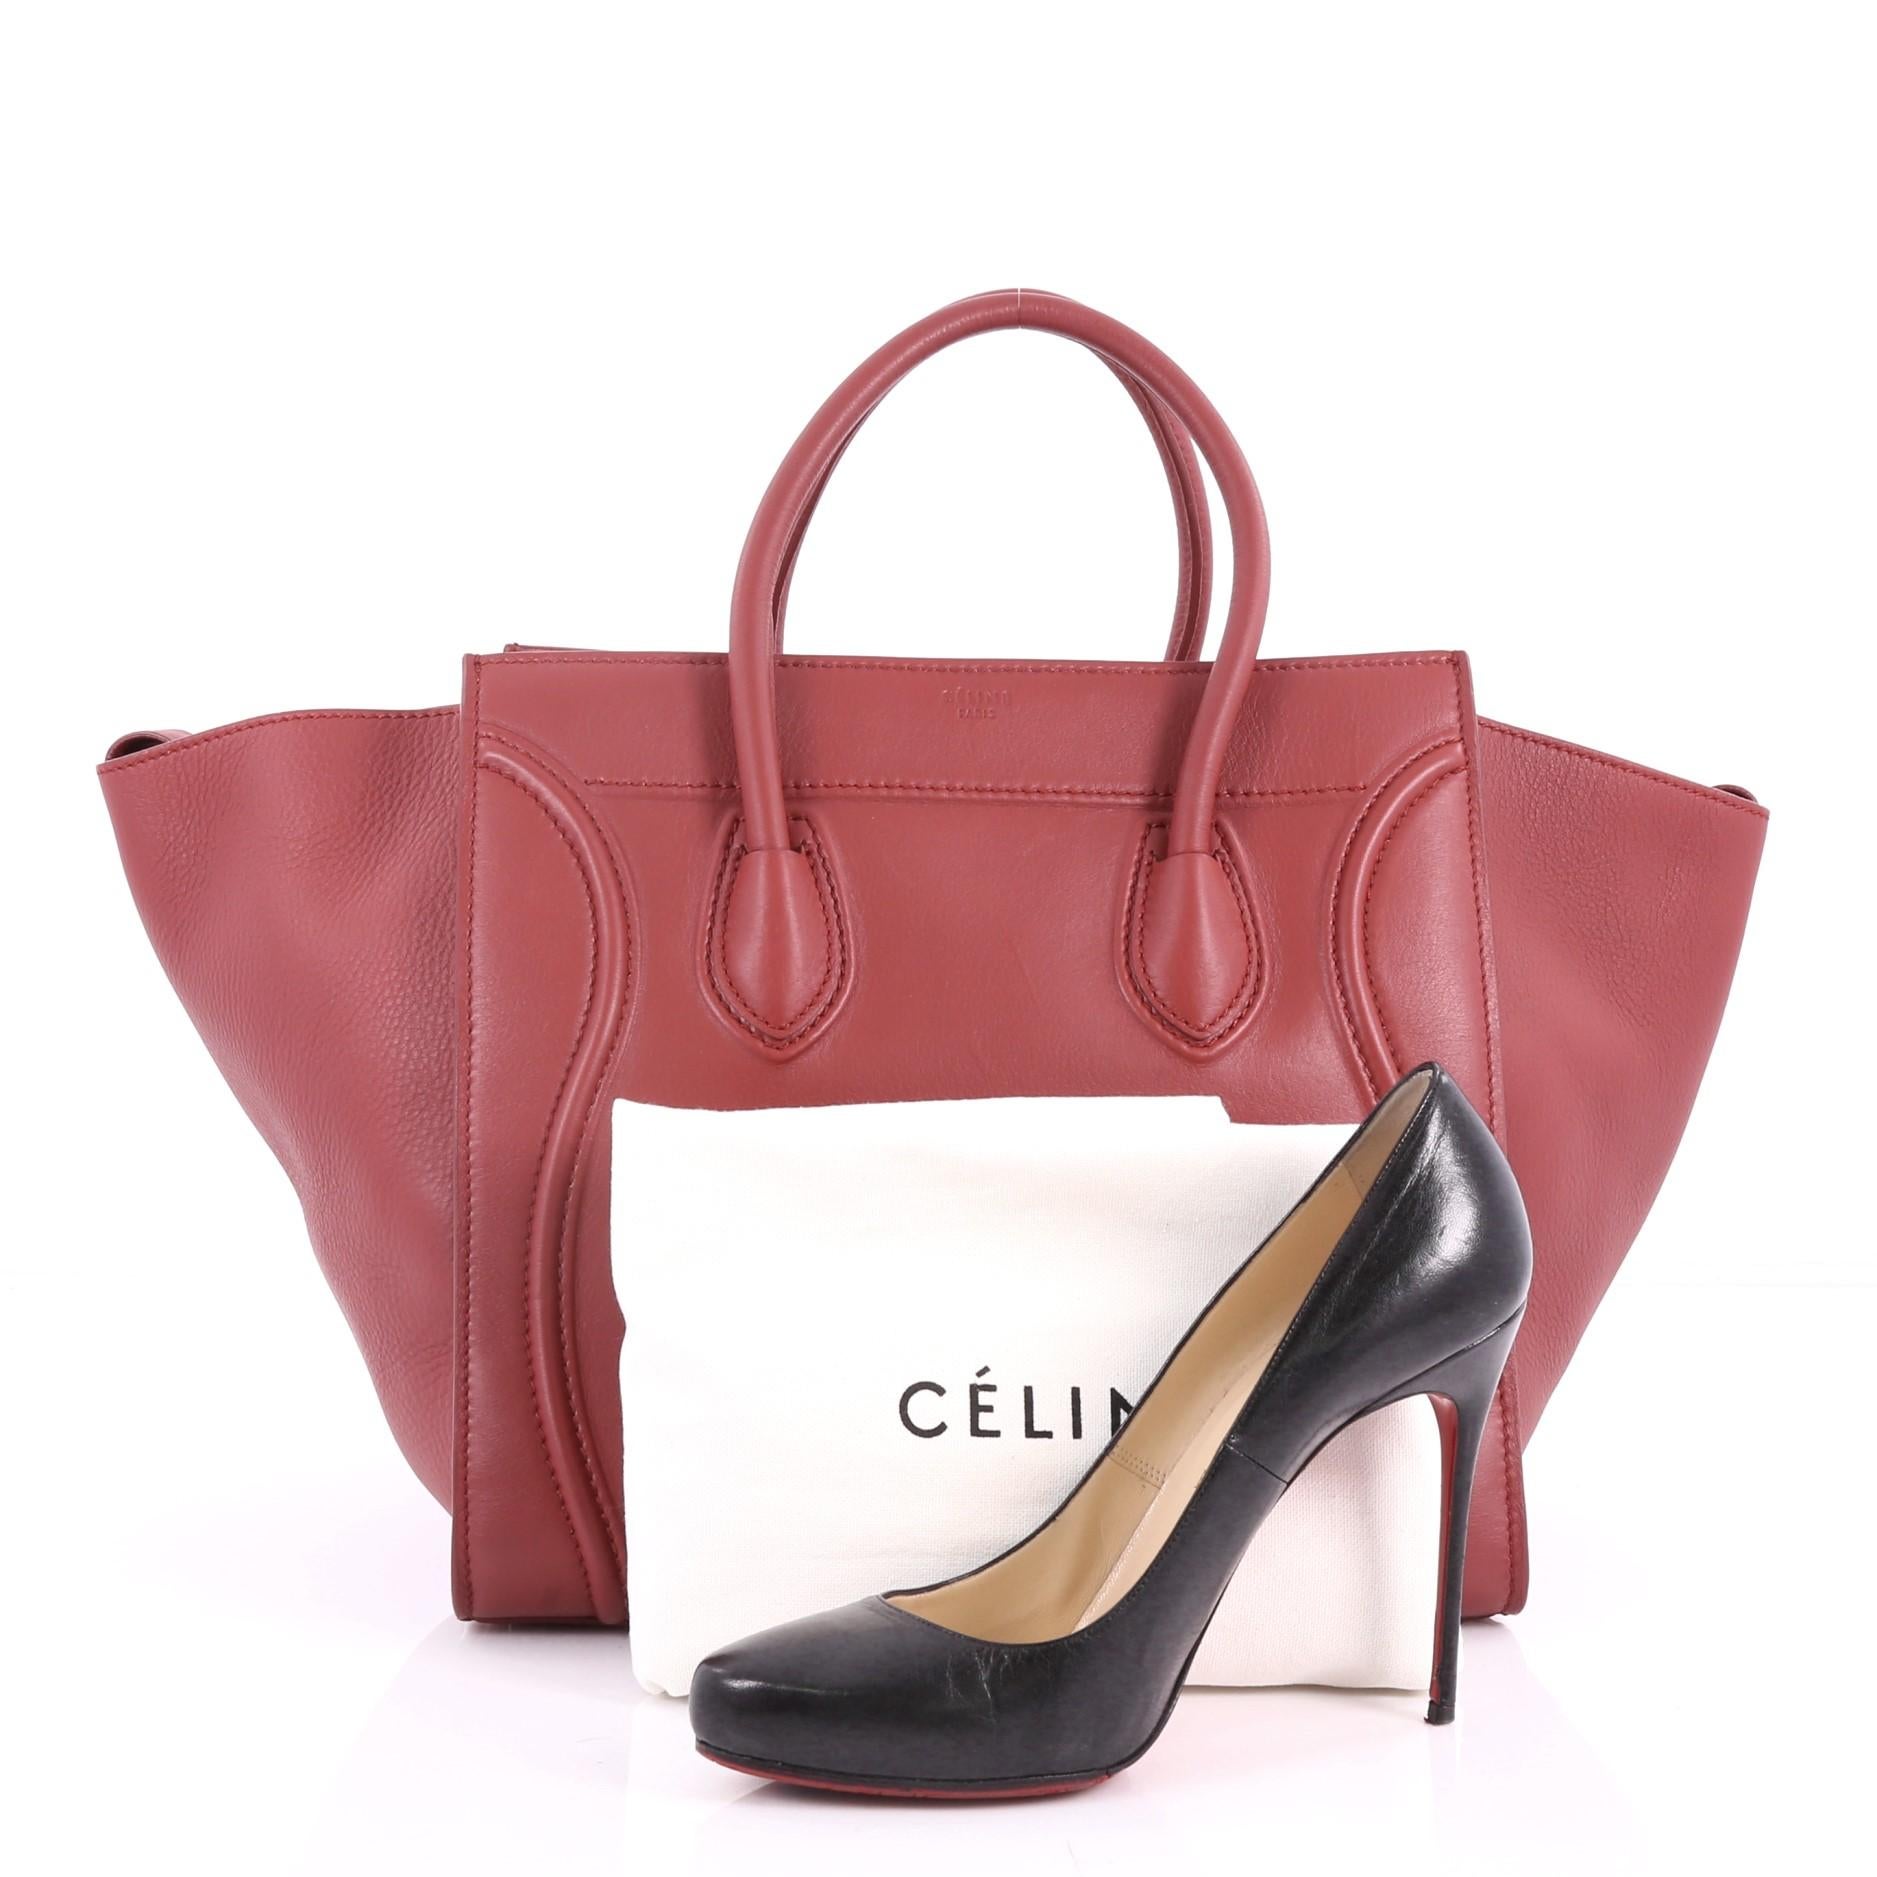 This authentic Celine Phantom Handbag Grainy Leather Medium is one of the most sought-after bags beloved by fashionistas. Crafted from red grainy leather, this minimalist tote features dual-rolled handles, an exterior front pocket, protective base